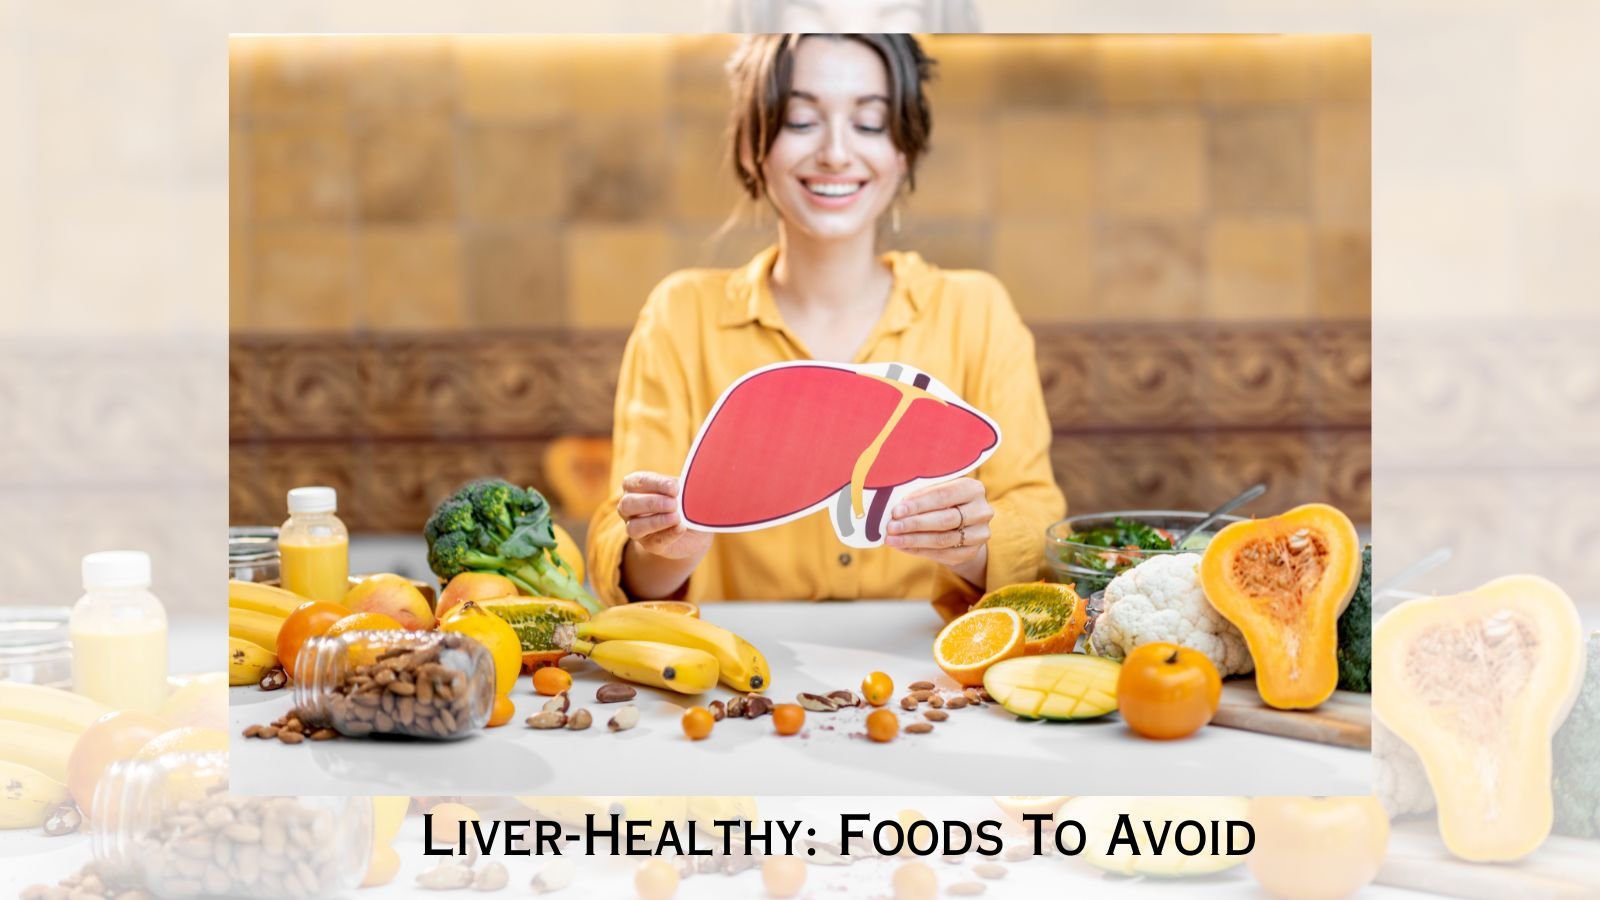 Liver-Healthy: Foods To Avoid